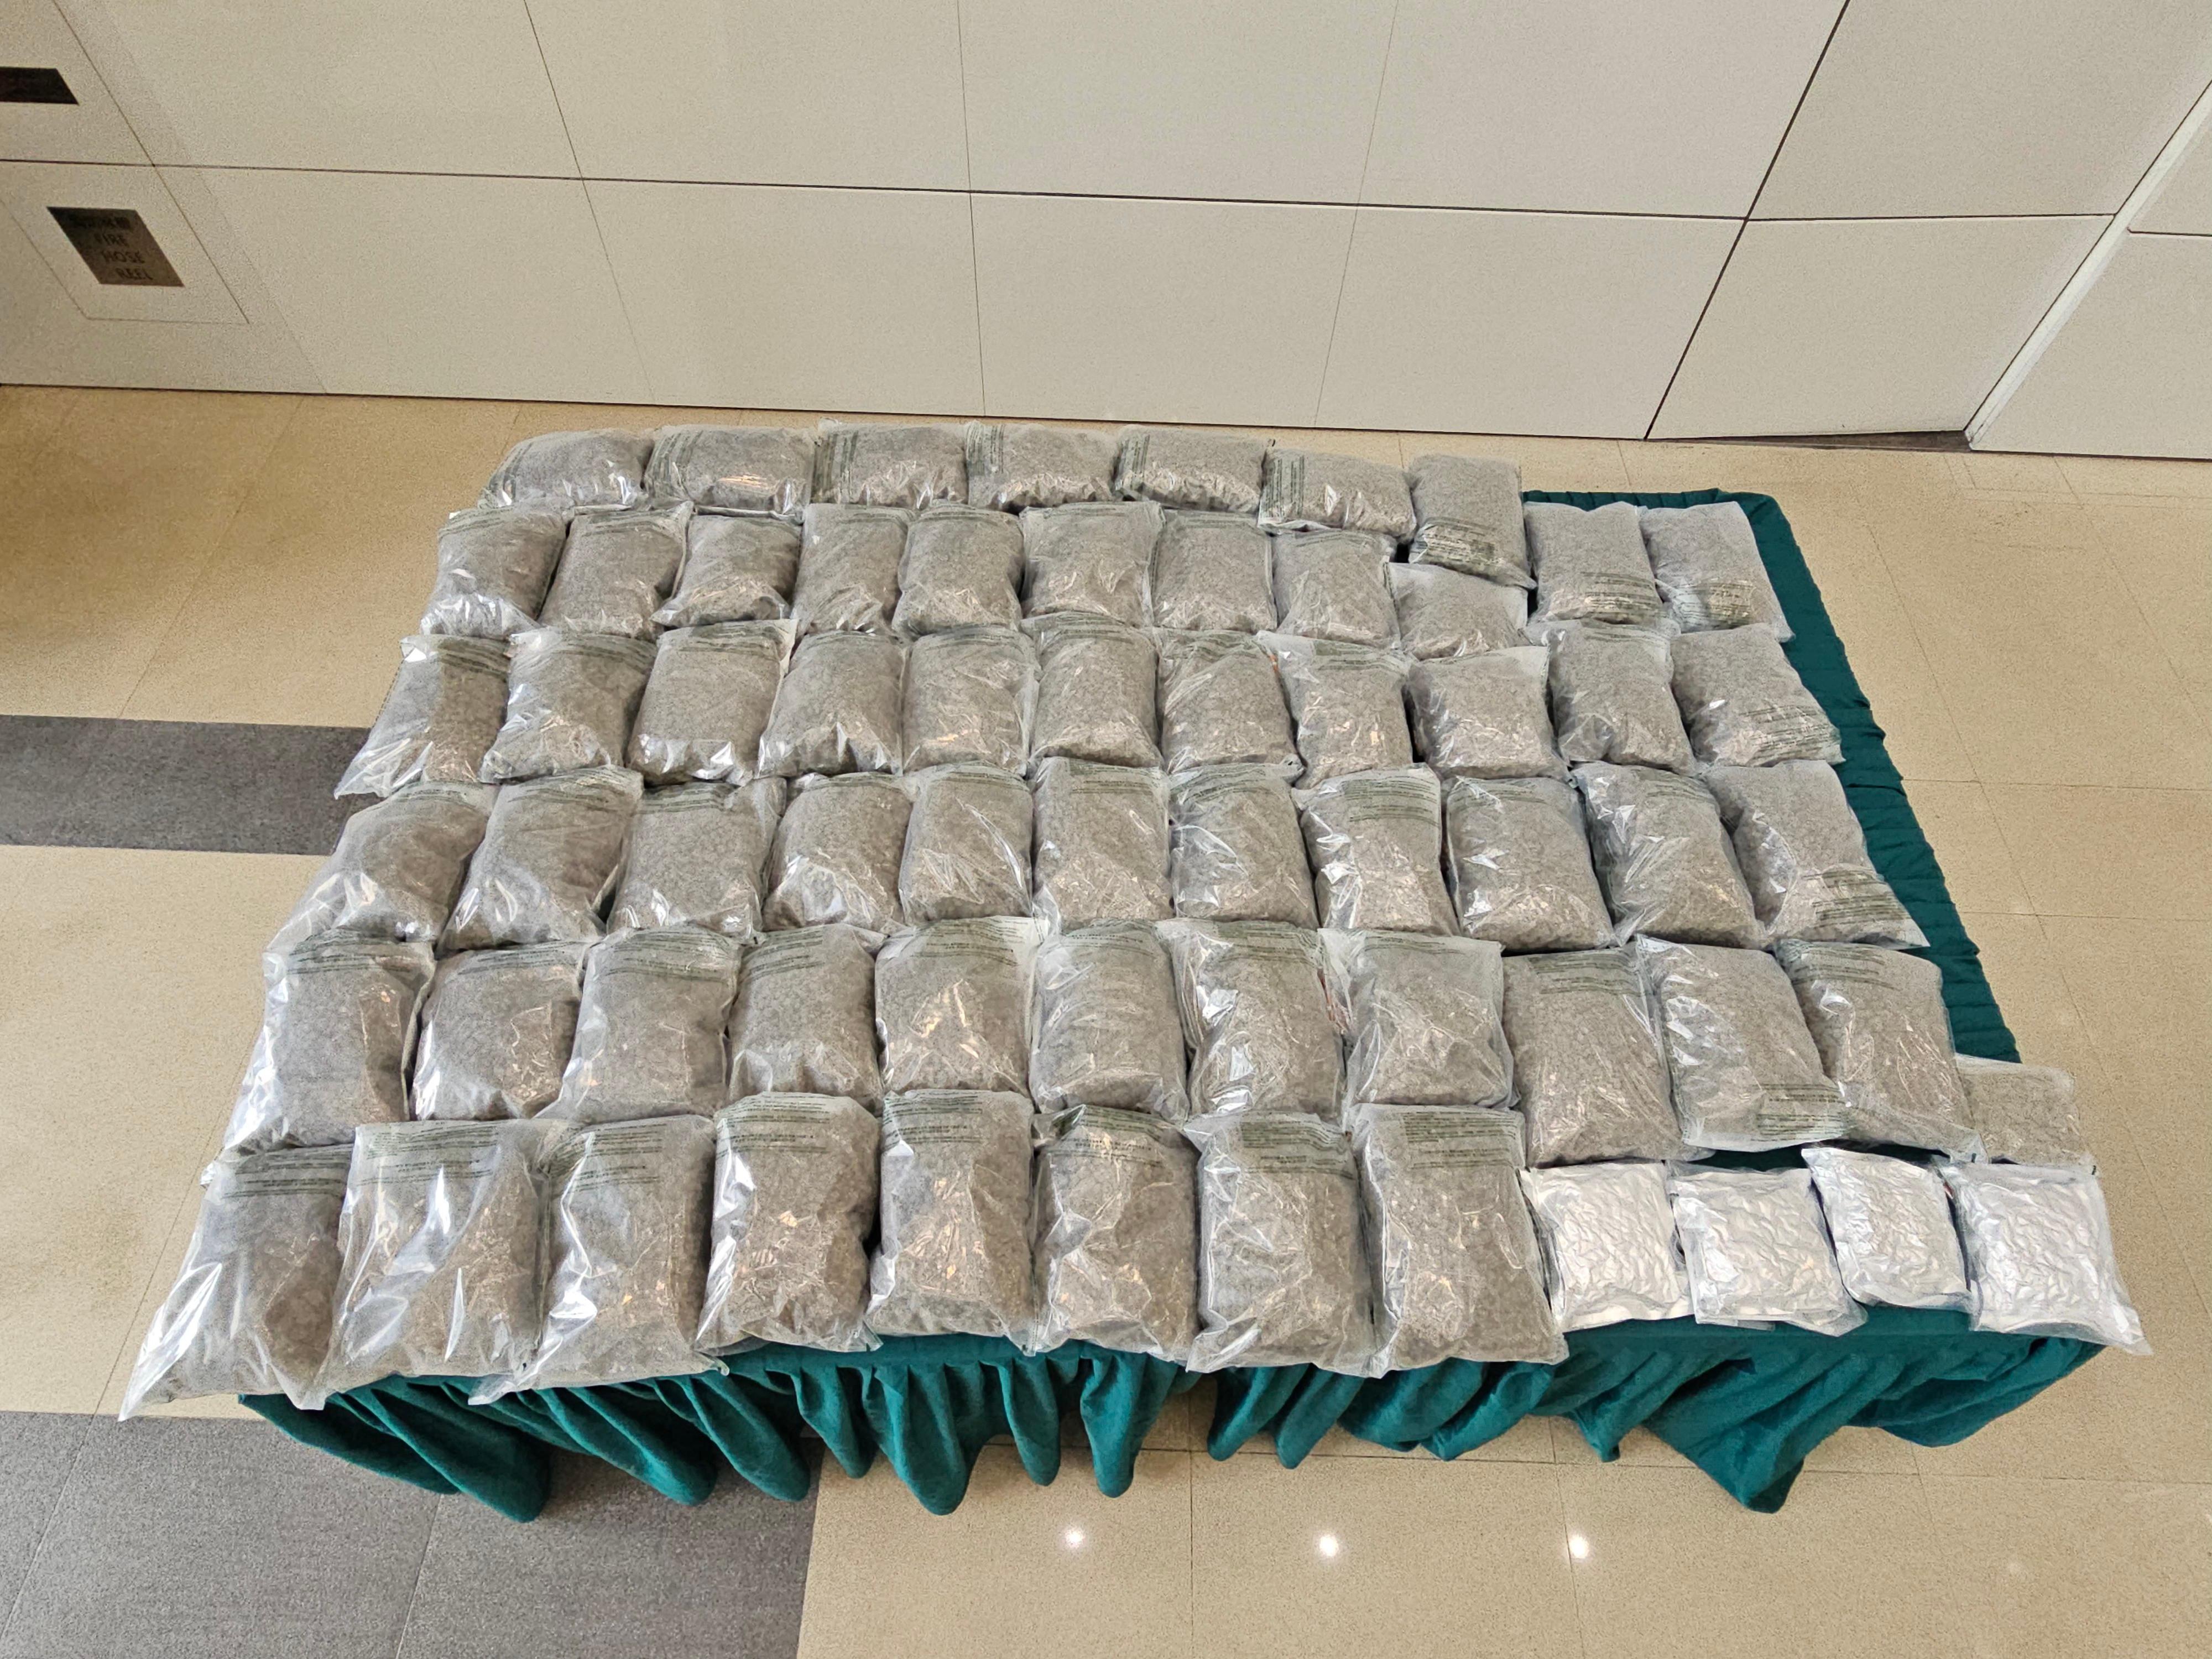 ​Hong Kong Customs conducted anti-narcotics operations on August 18 and October 5 and detected two dangerous drugs trafficking cases. About 86 kilograms of suspected cannabis buds and a small quantity of suspected cocaine and suspected ketamine, with a total estimated market value of about $20.4 million, were seized. Photo shows the suspected cannabis buds seized on October 5.